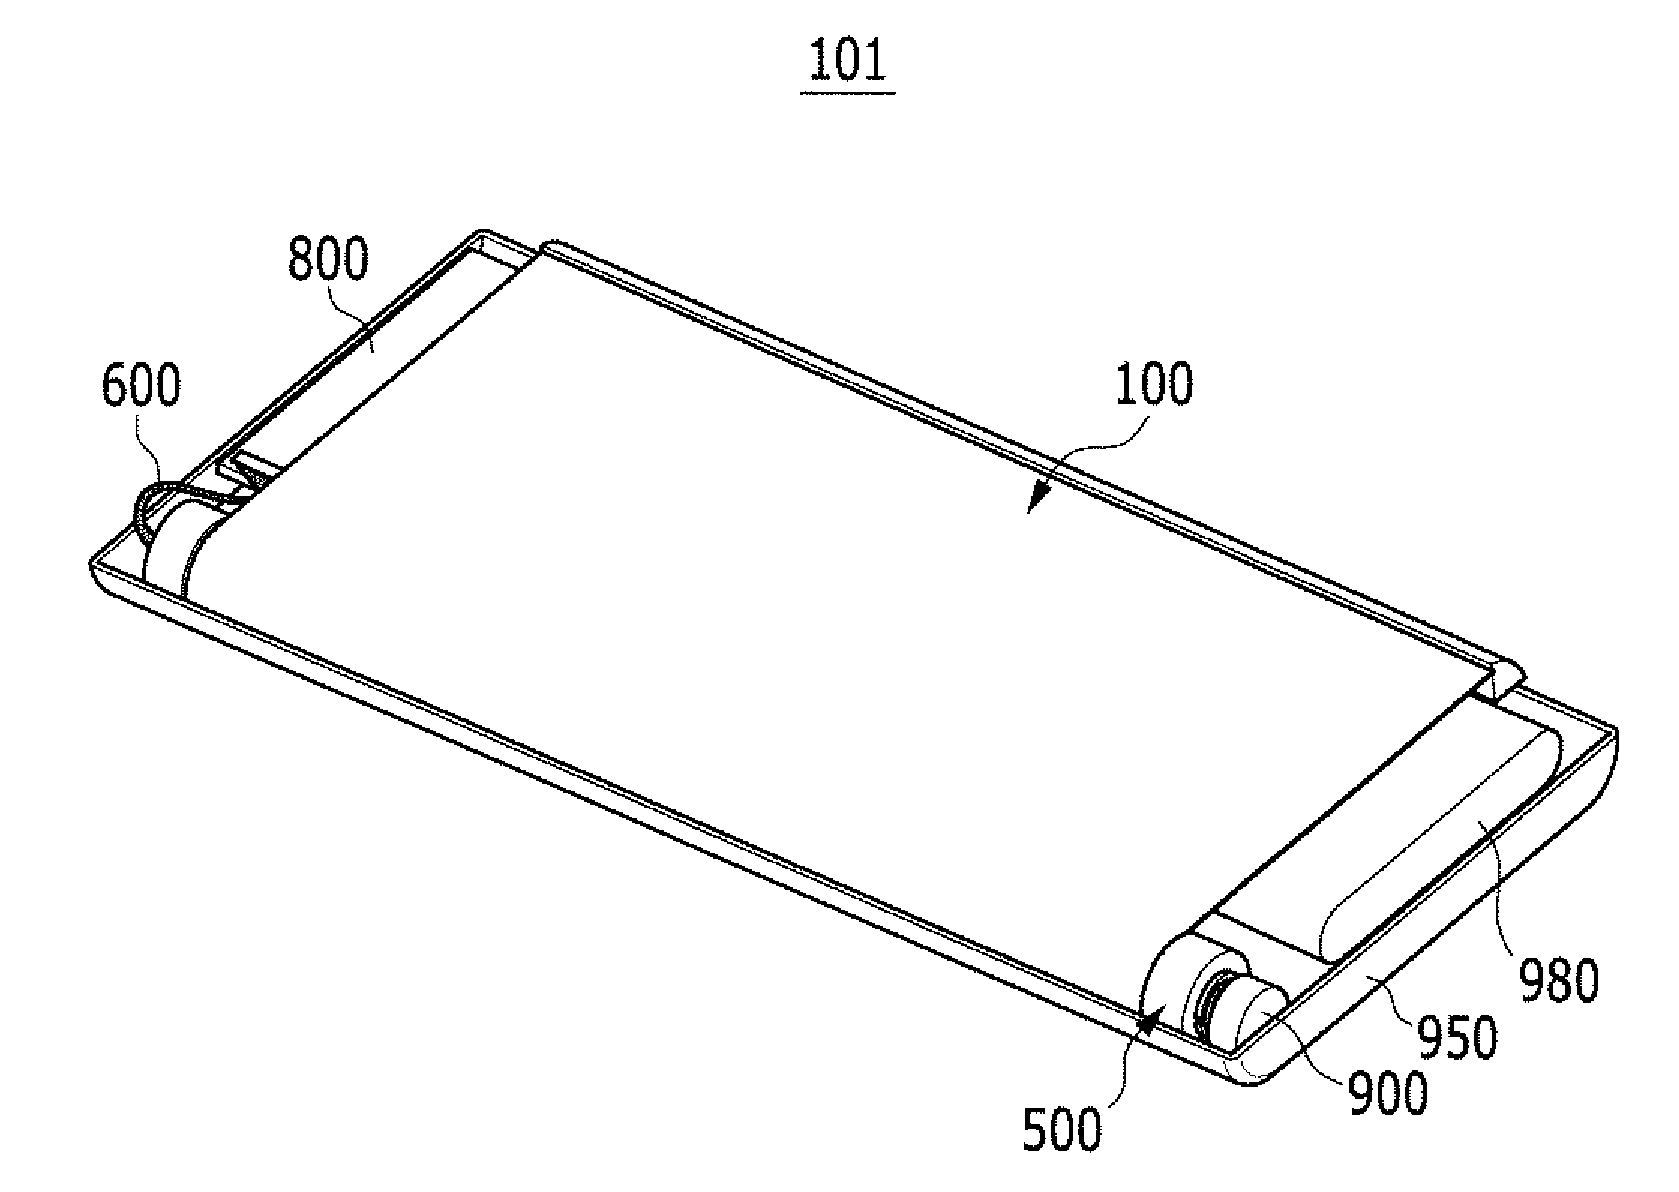 Display Device Having a Rollable Display Unit